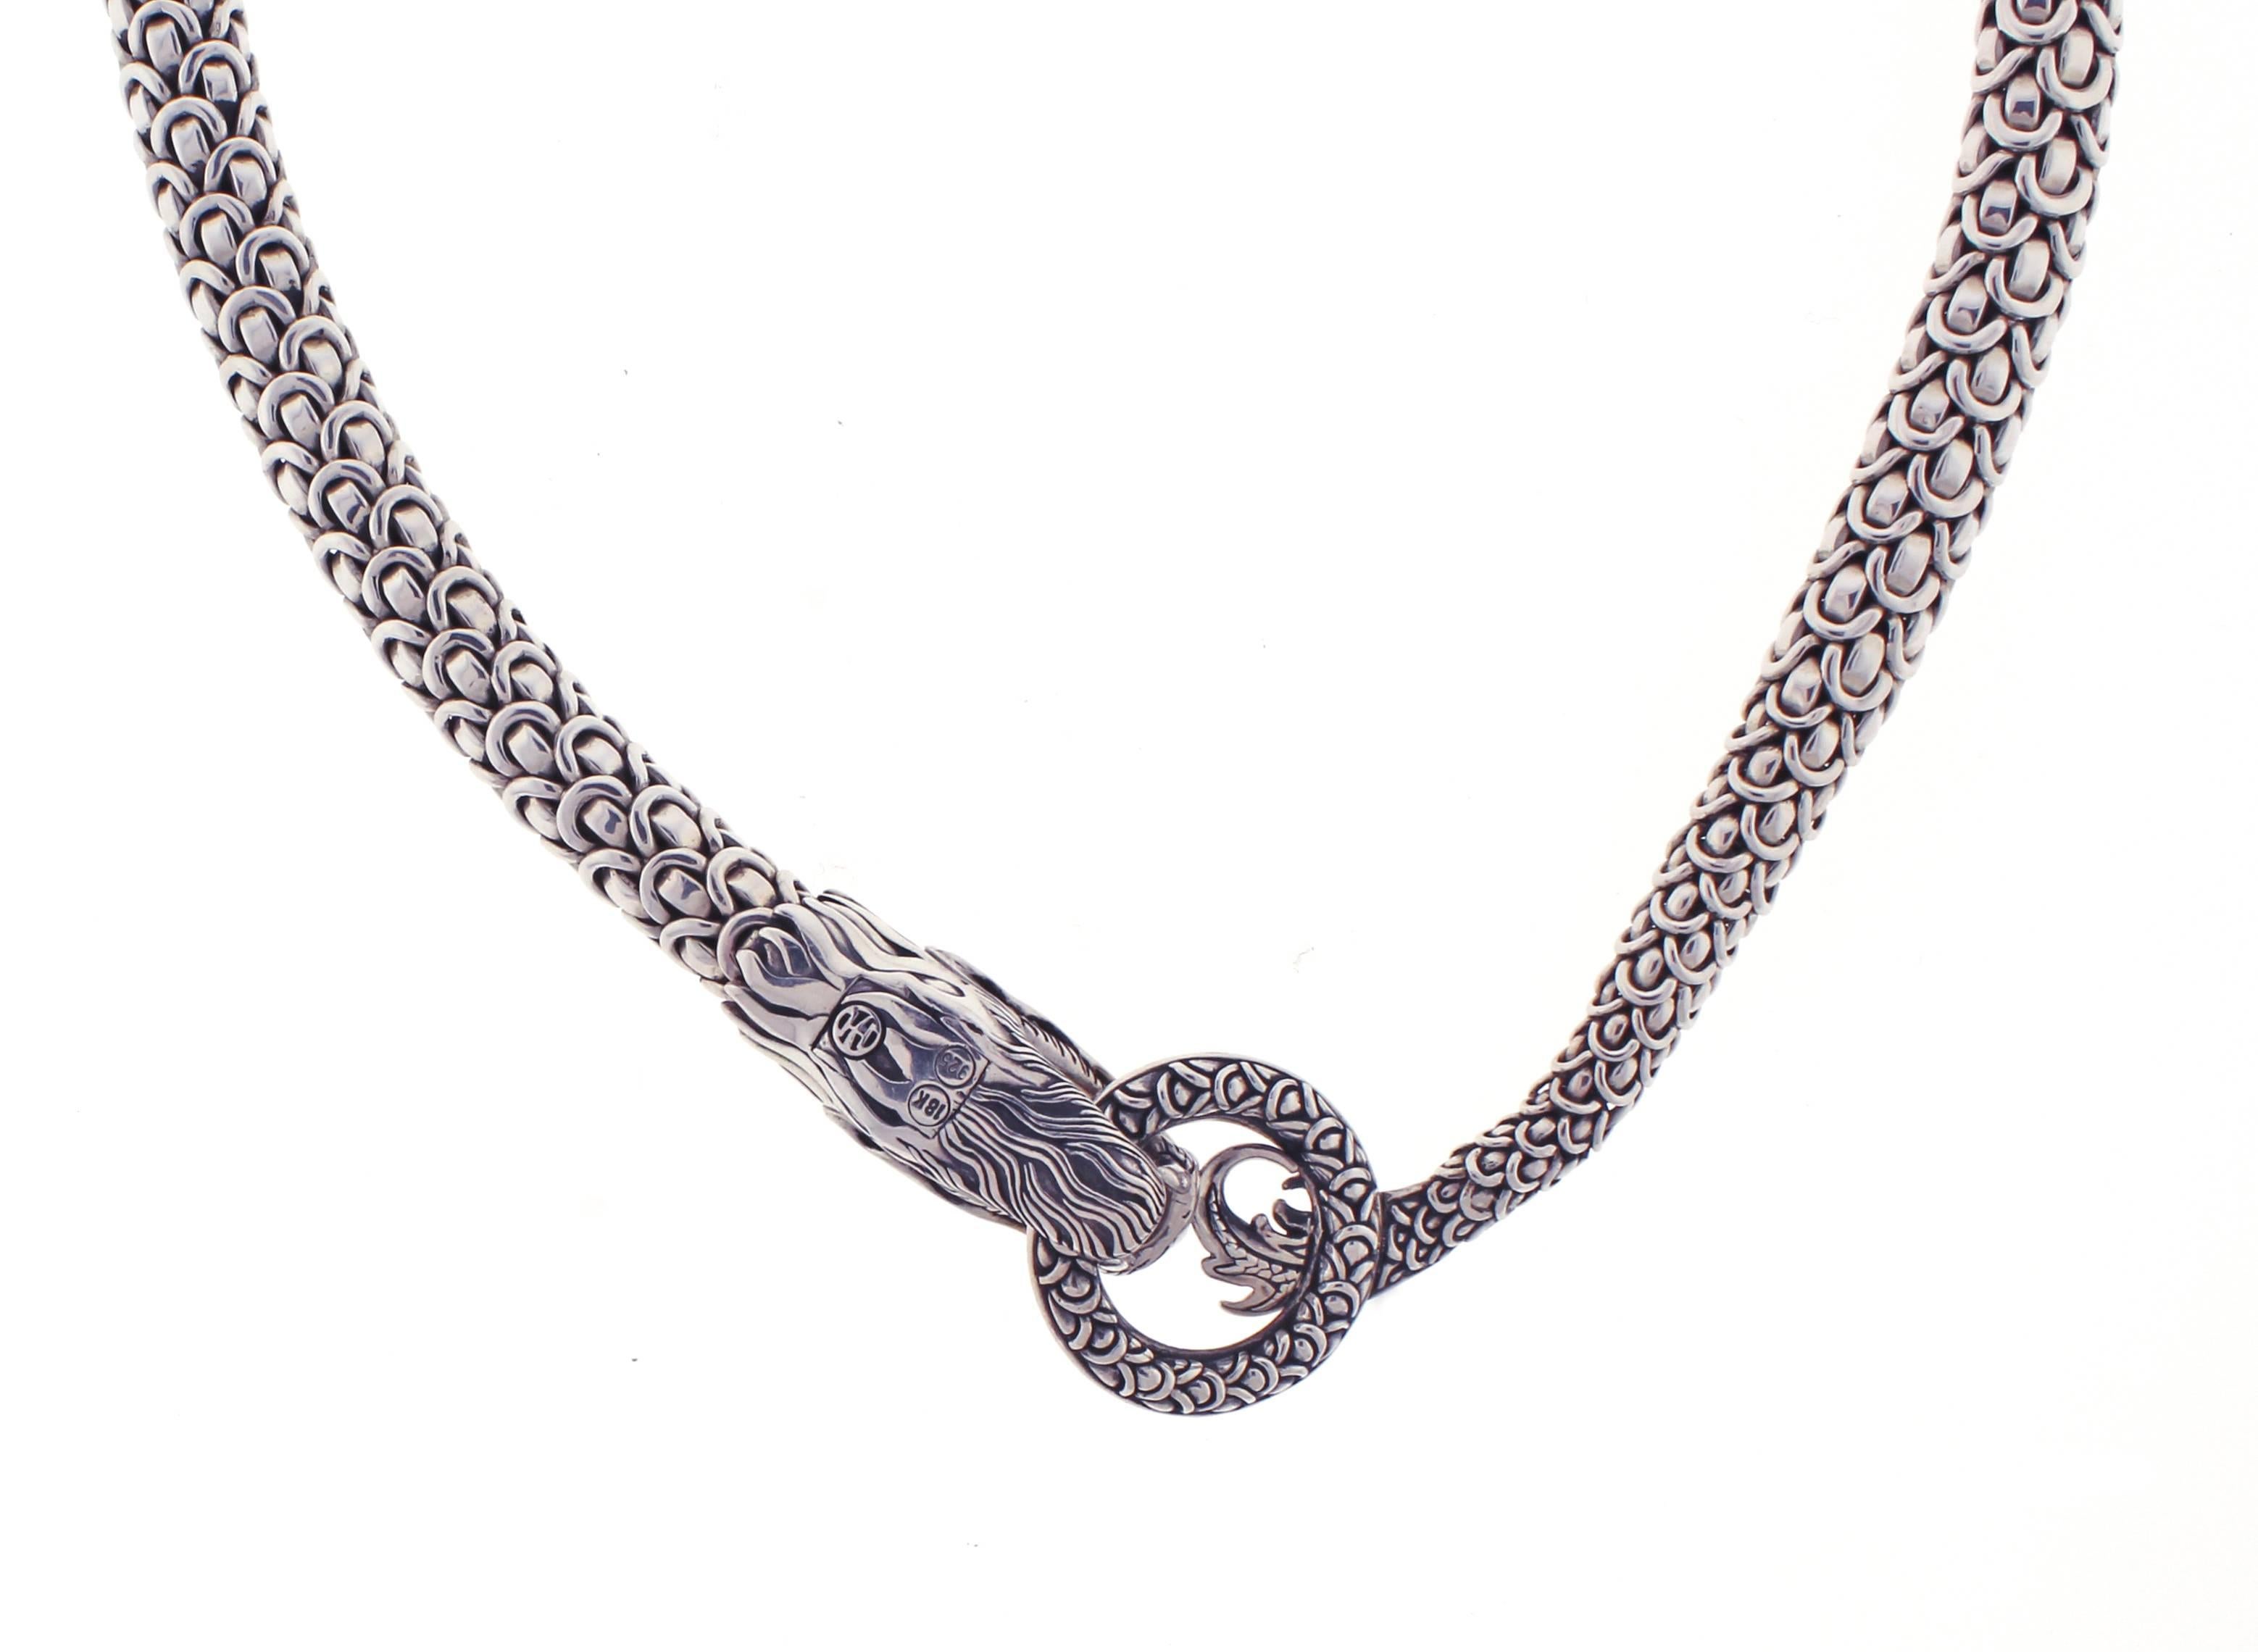 Amazing Naga dragon from John Hardy's Naga collection.
Intricately made out of sterling silver, this necklace features a dragon's head at one end of the 
dragon mail chain while his fiery tail rests at the other end. 
They loop around and meet at a